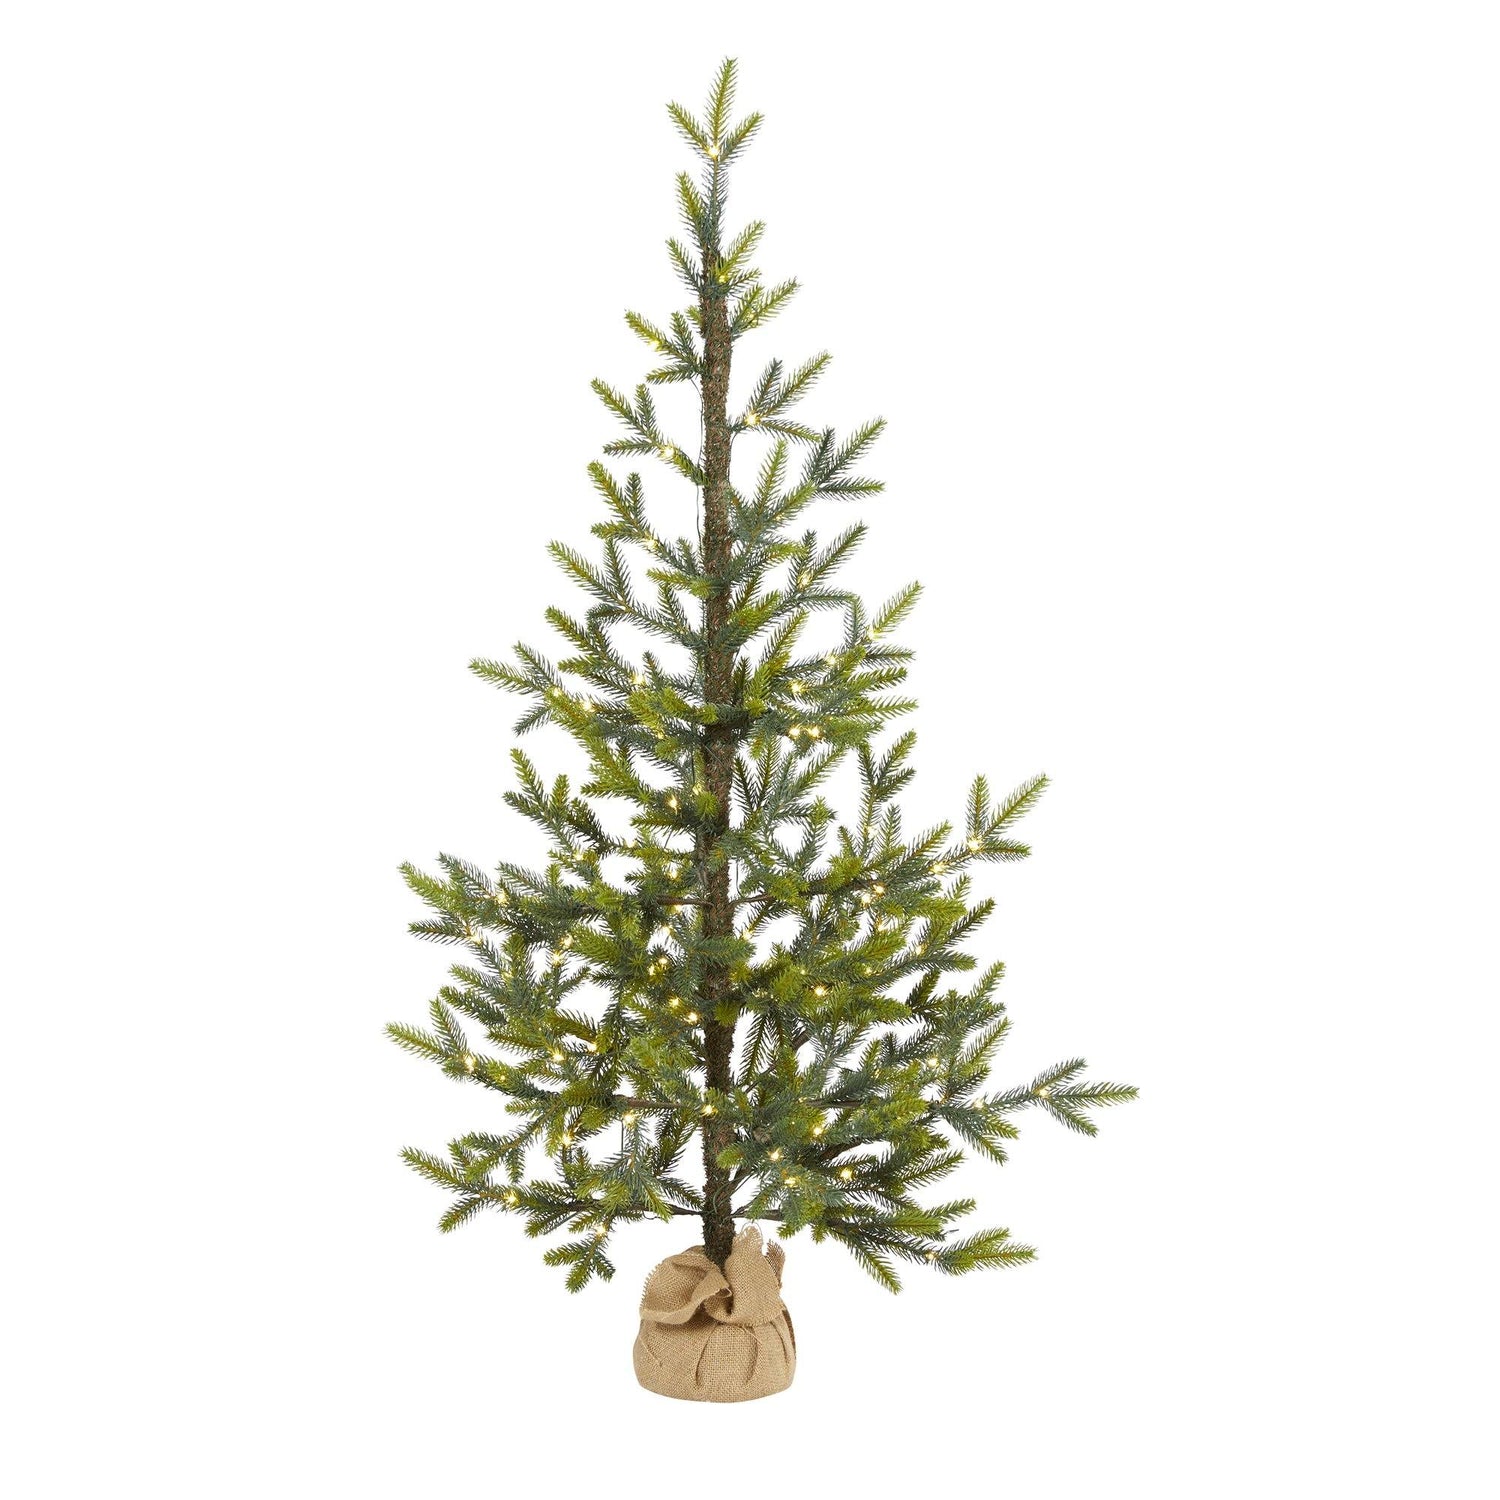 4’ Fraser Fir “Natural Look” Artificial Christmas Tree with 100 Clear LED Lights, a Burlap Base and 403 Bendable Branches